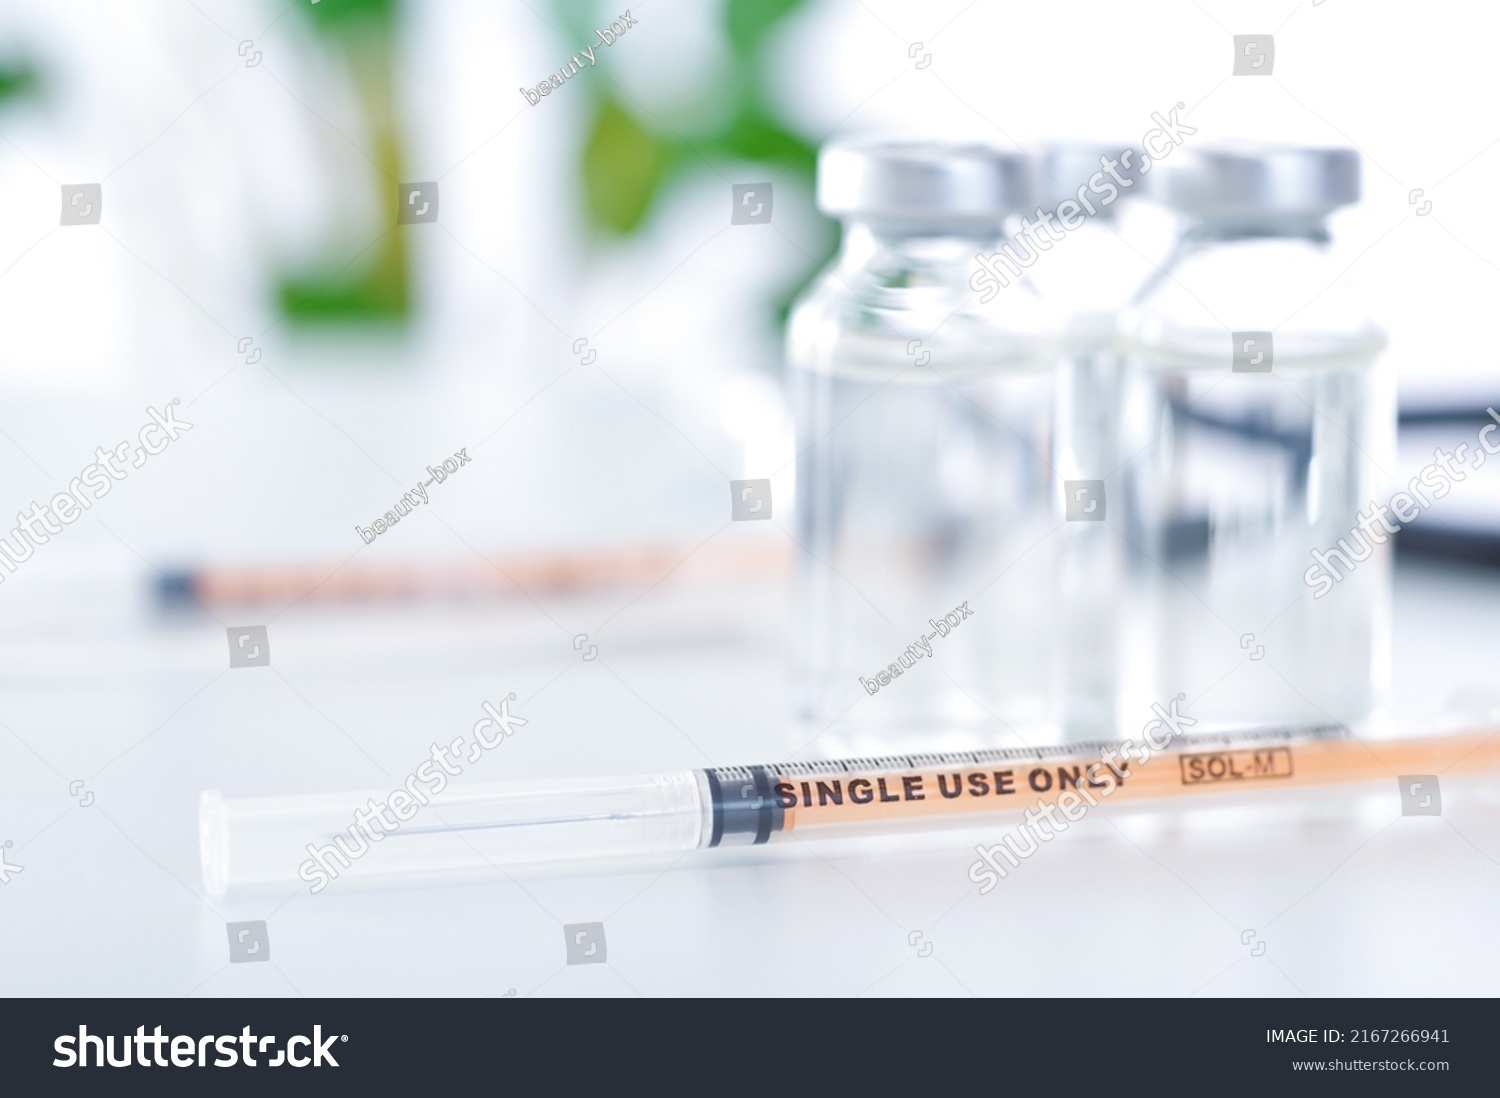 Vial jars and syringes placed on a clean table #2167266941